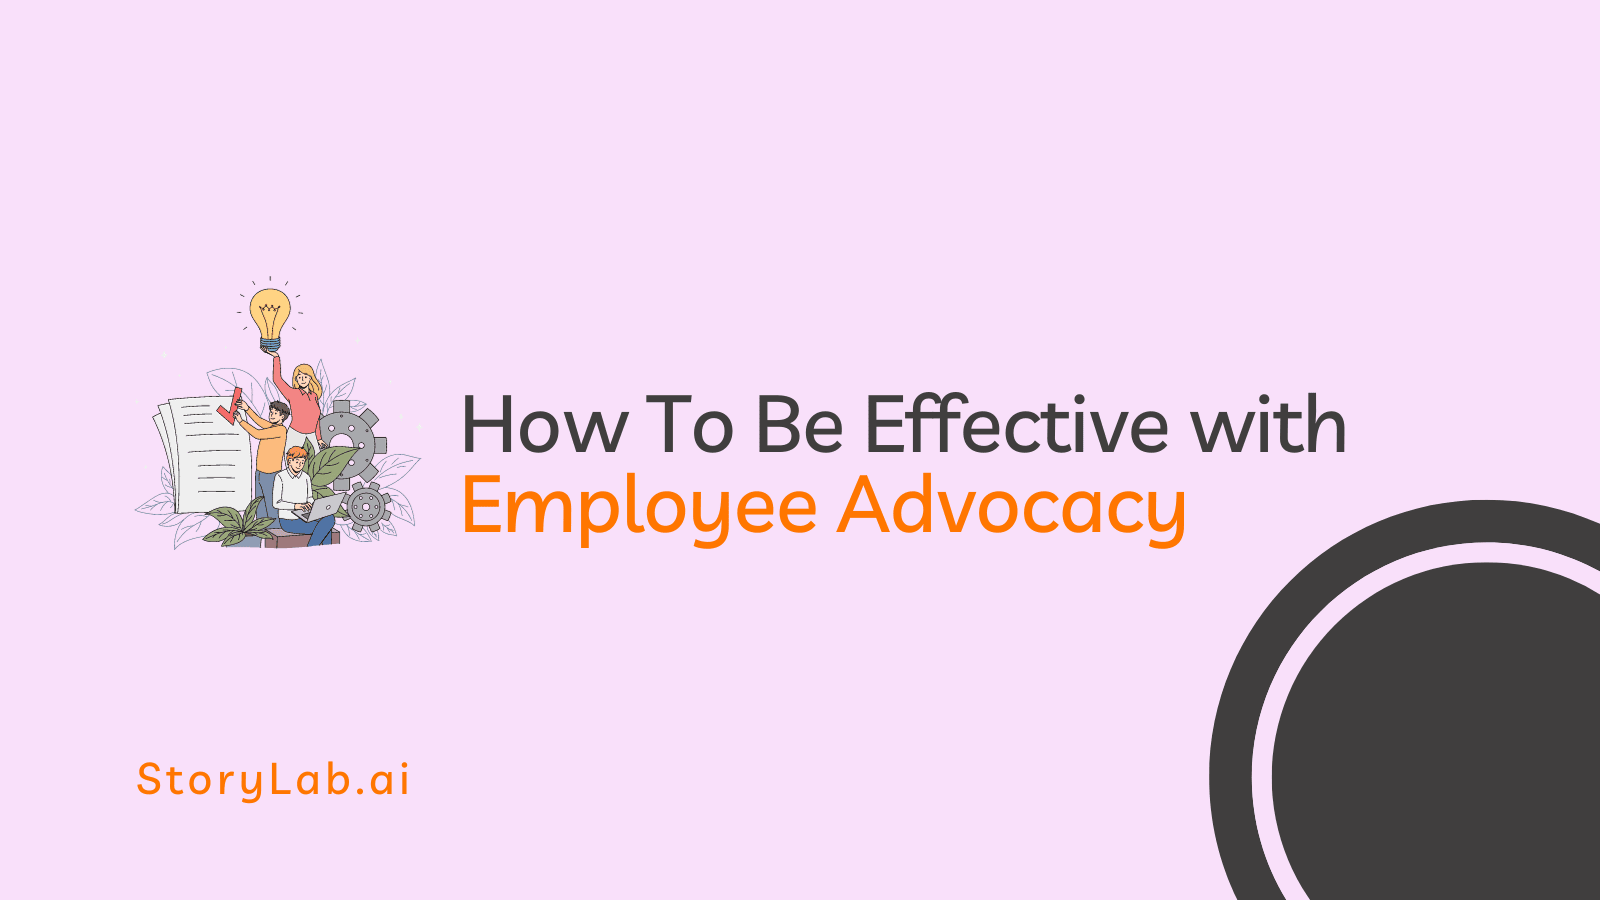 How To Be Effective with Employee Advocacy